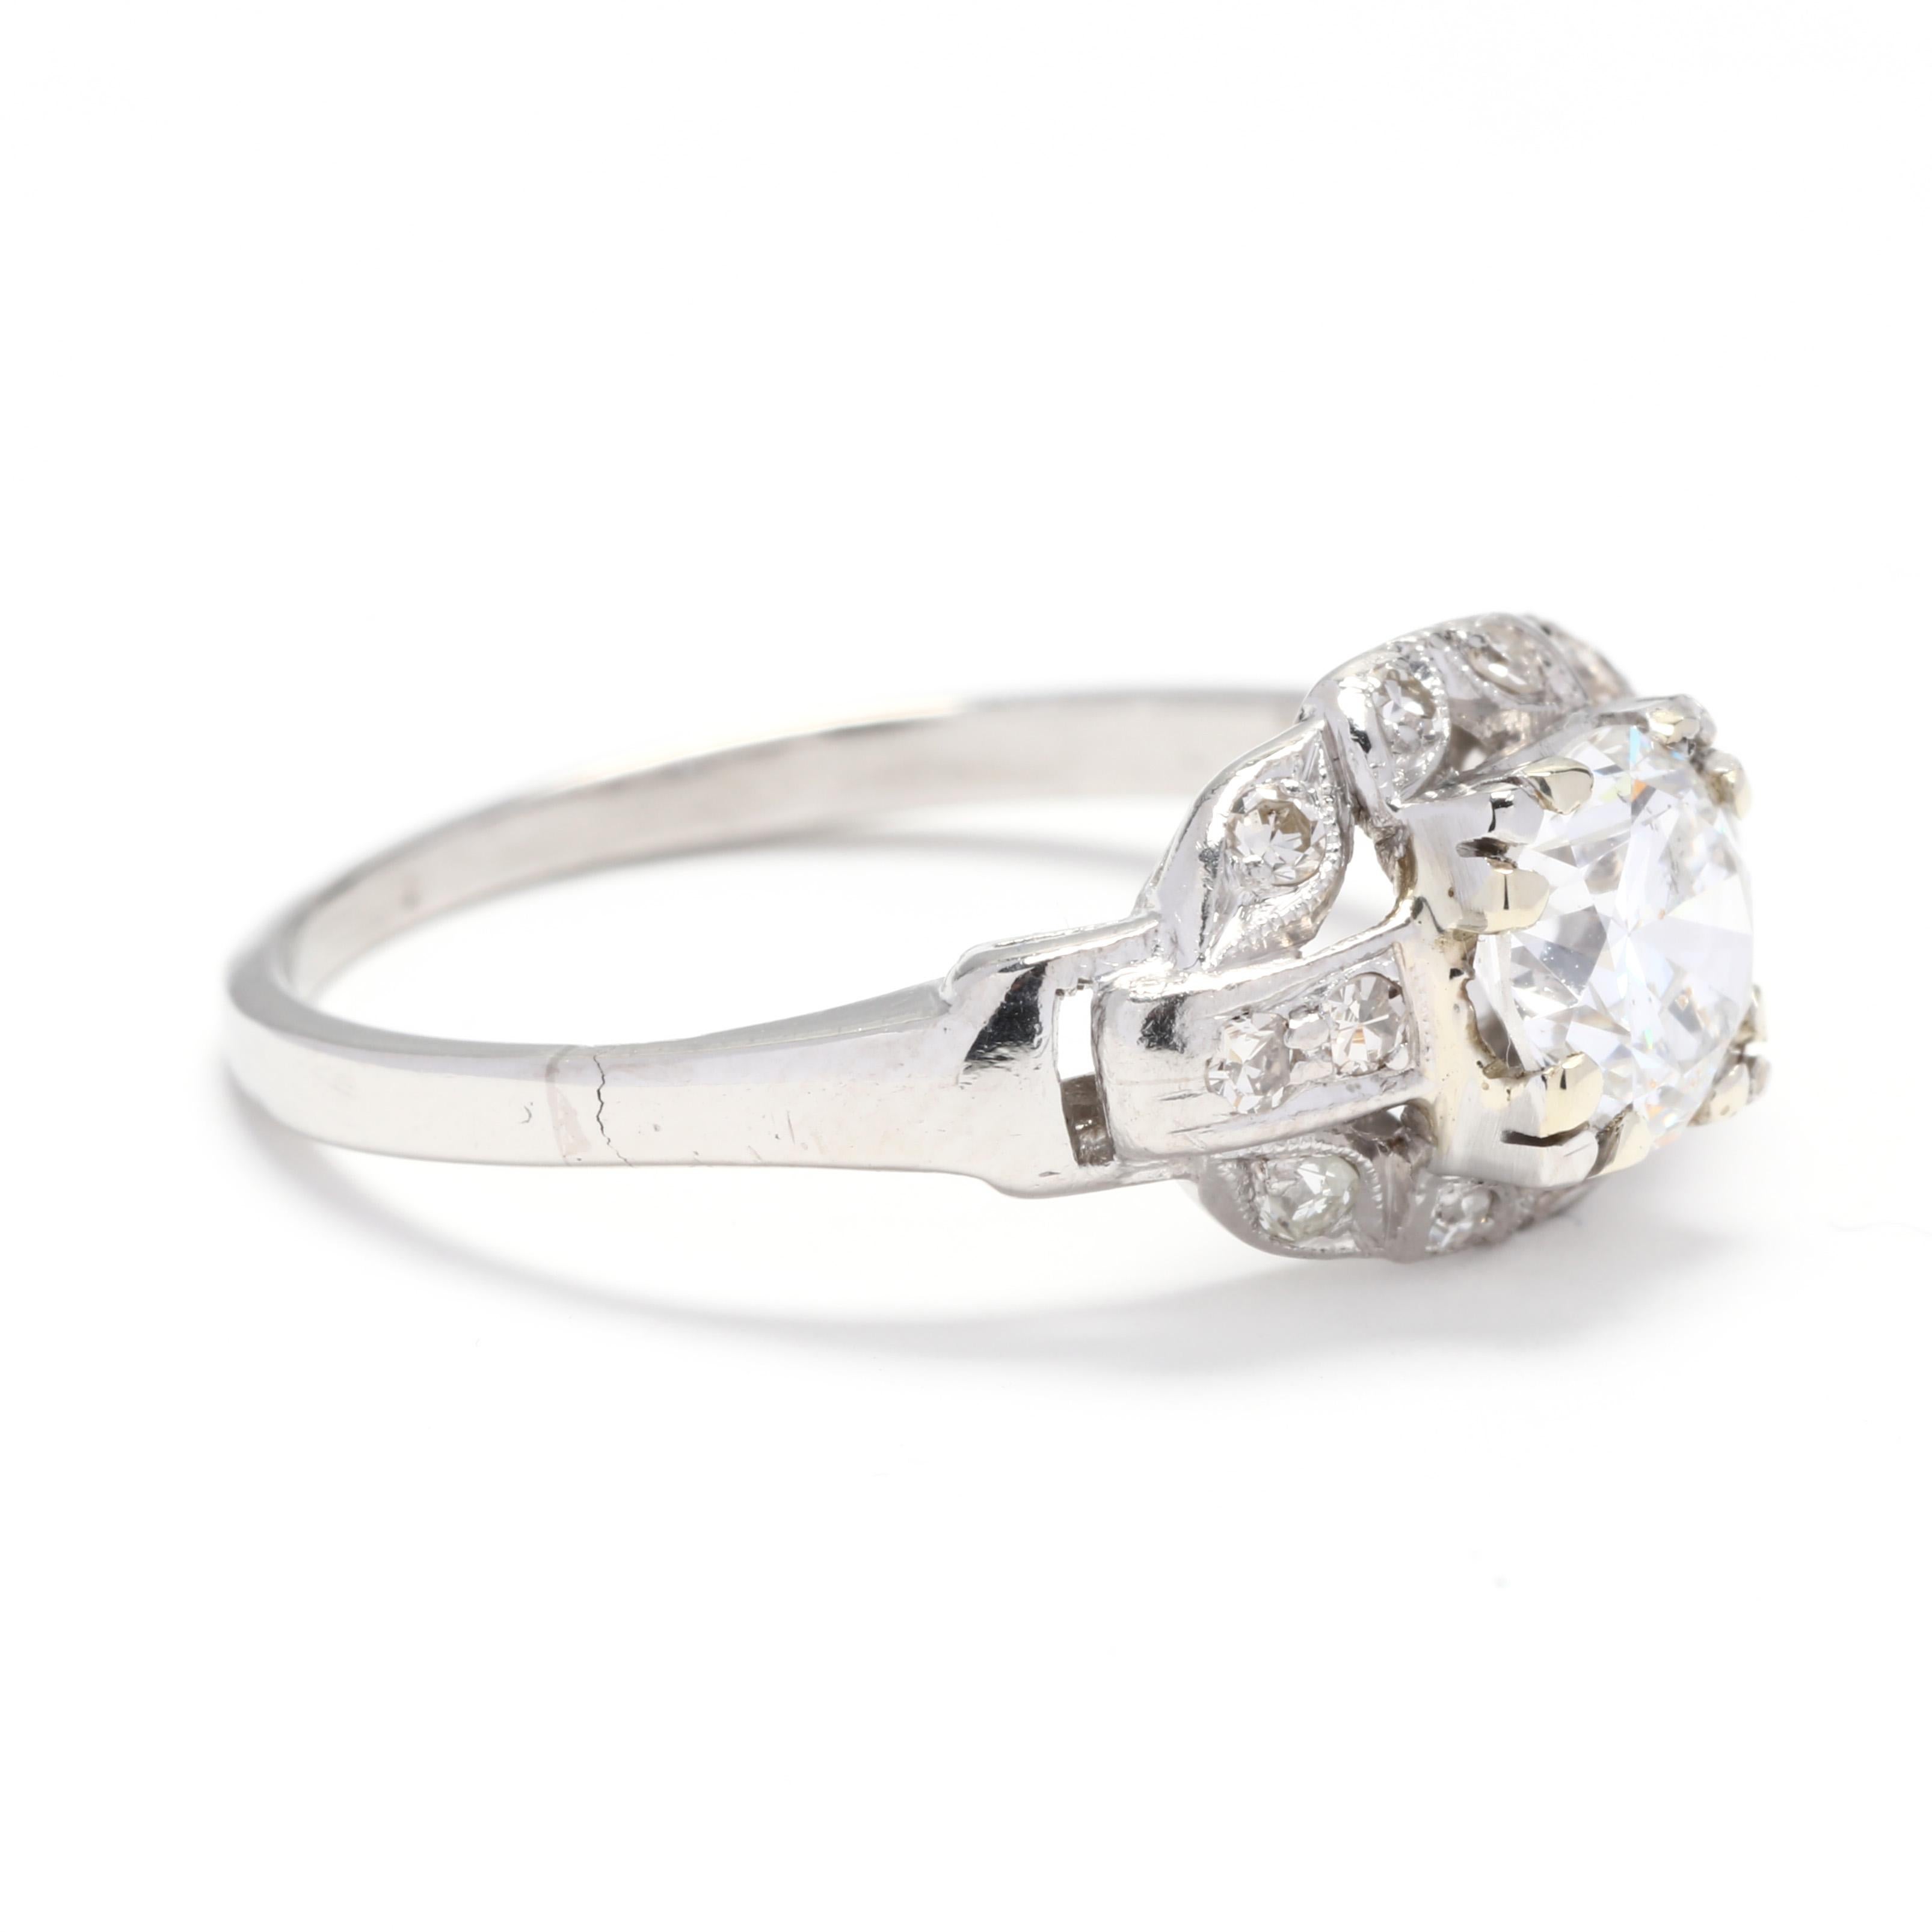 A vintage 14 karat white gold and diamond engagement ring. This ring features a round brilliant cut weighing approximately .85 carat with single cut diamond accents surrounding the center stone and a slightly tapered polished band.

Stones:
-